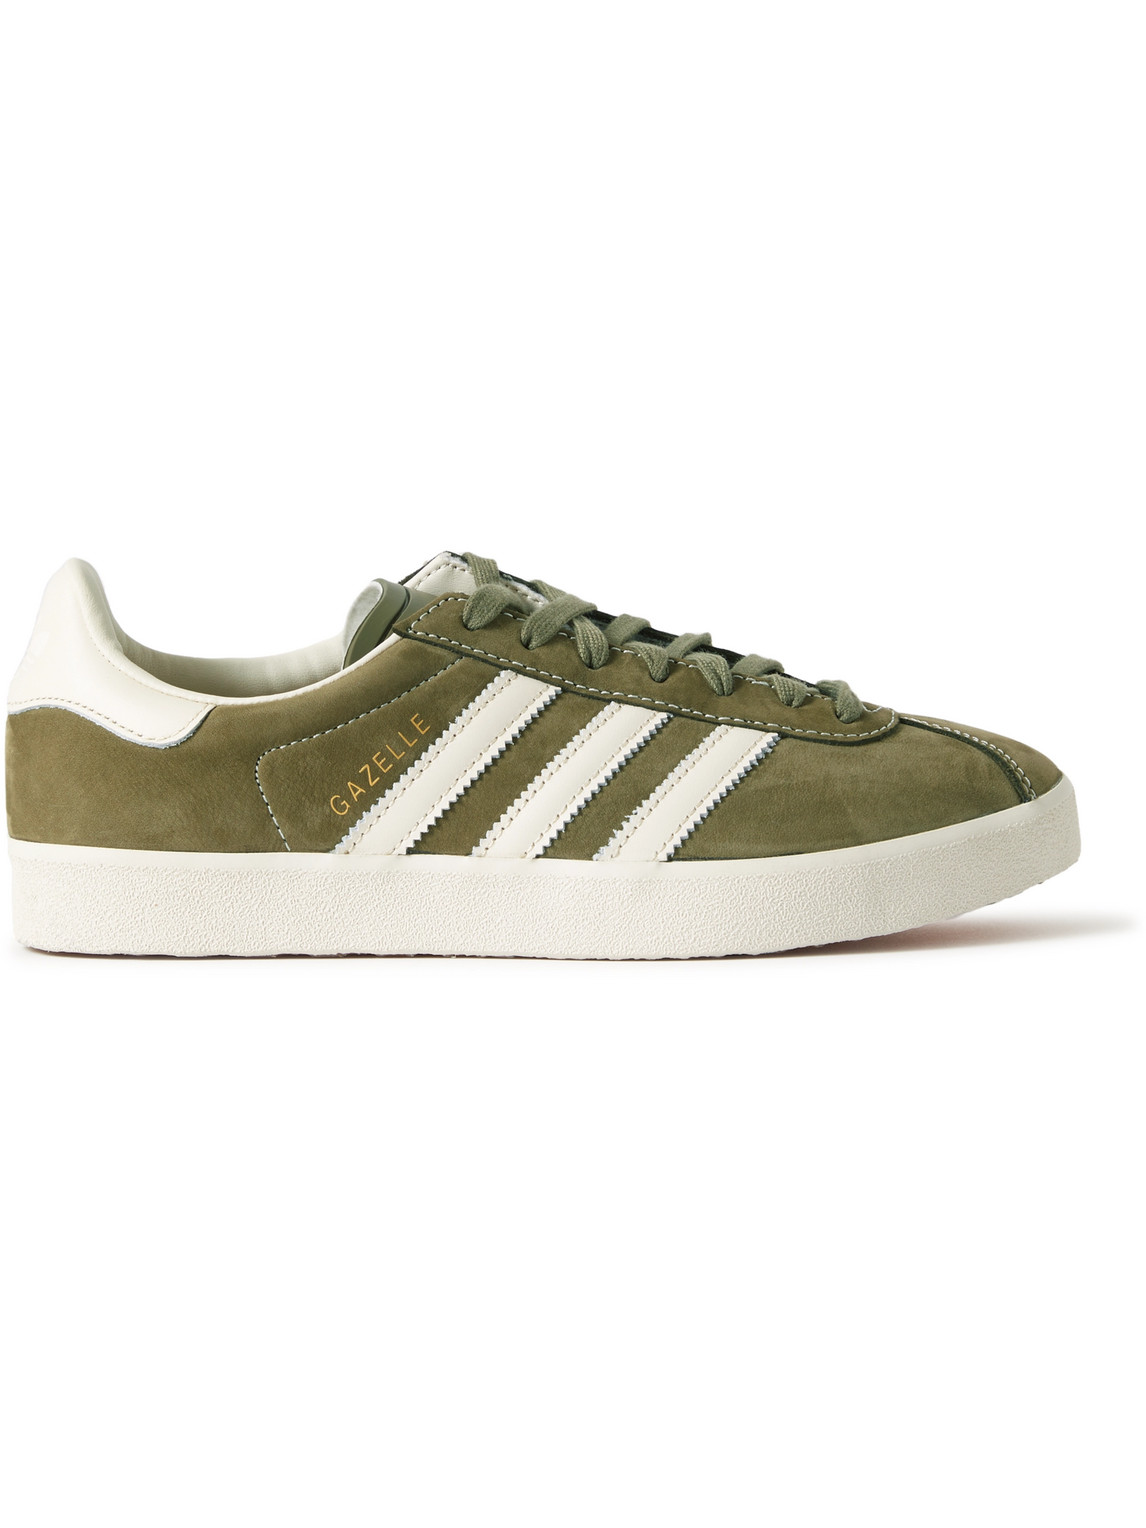 ADIDAS ORIGINALS GAZELLE 85 LEATHER-TRIMMED SUEDE SNEAKERS